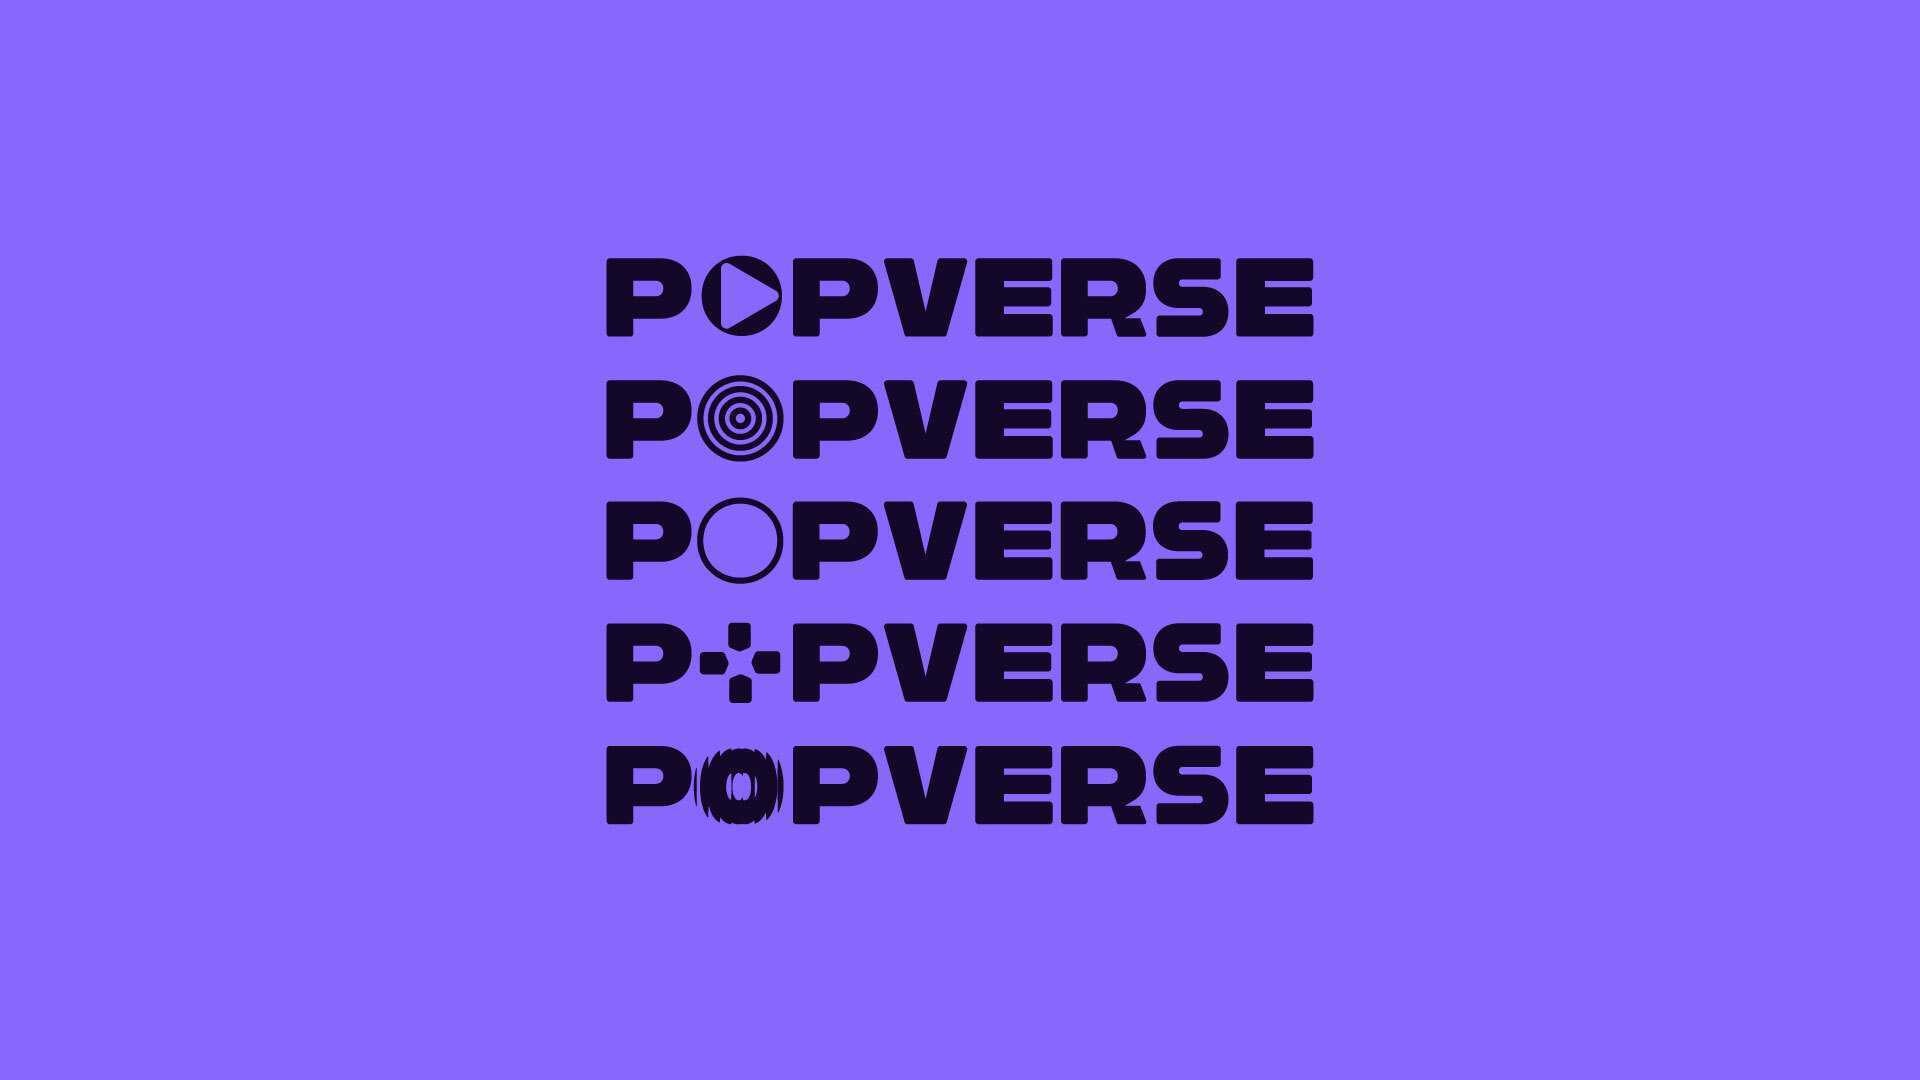 the Popverse logo repeated